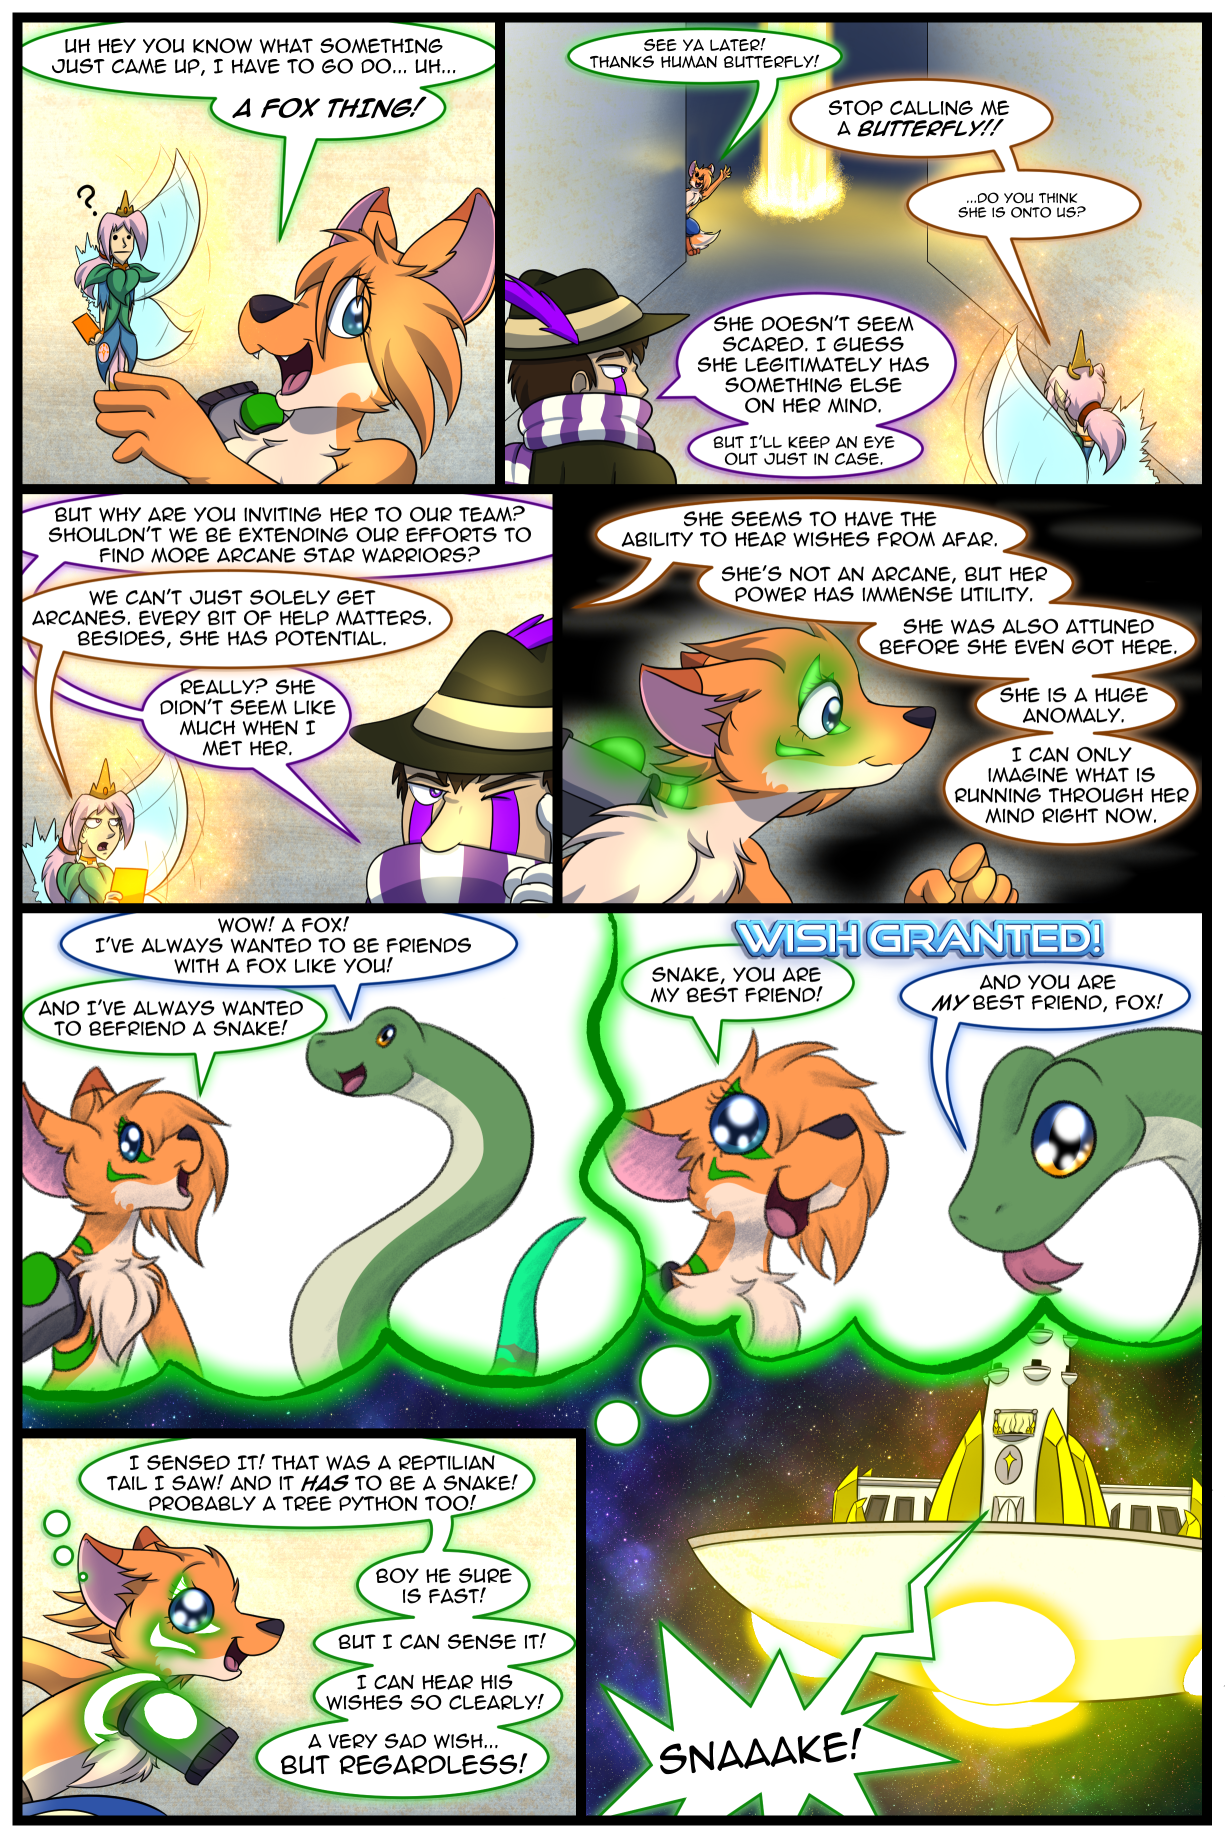 Ch5 Page 56 – Snake